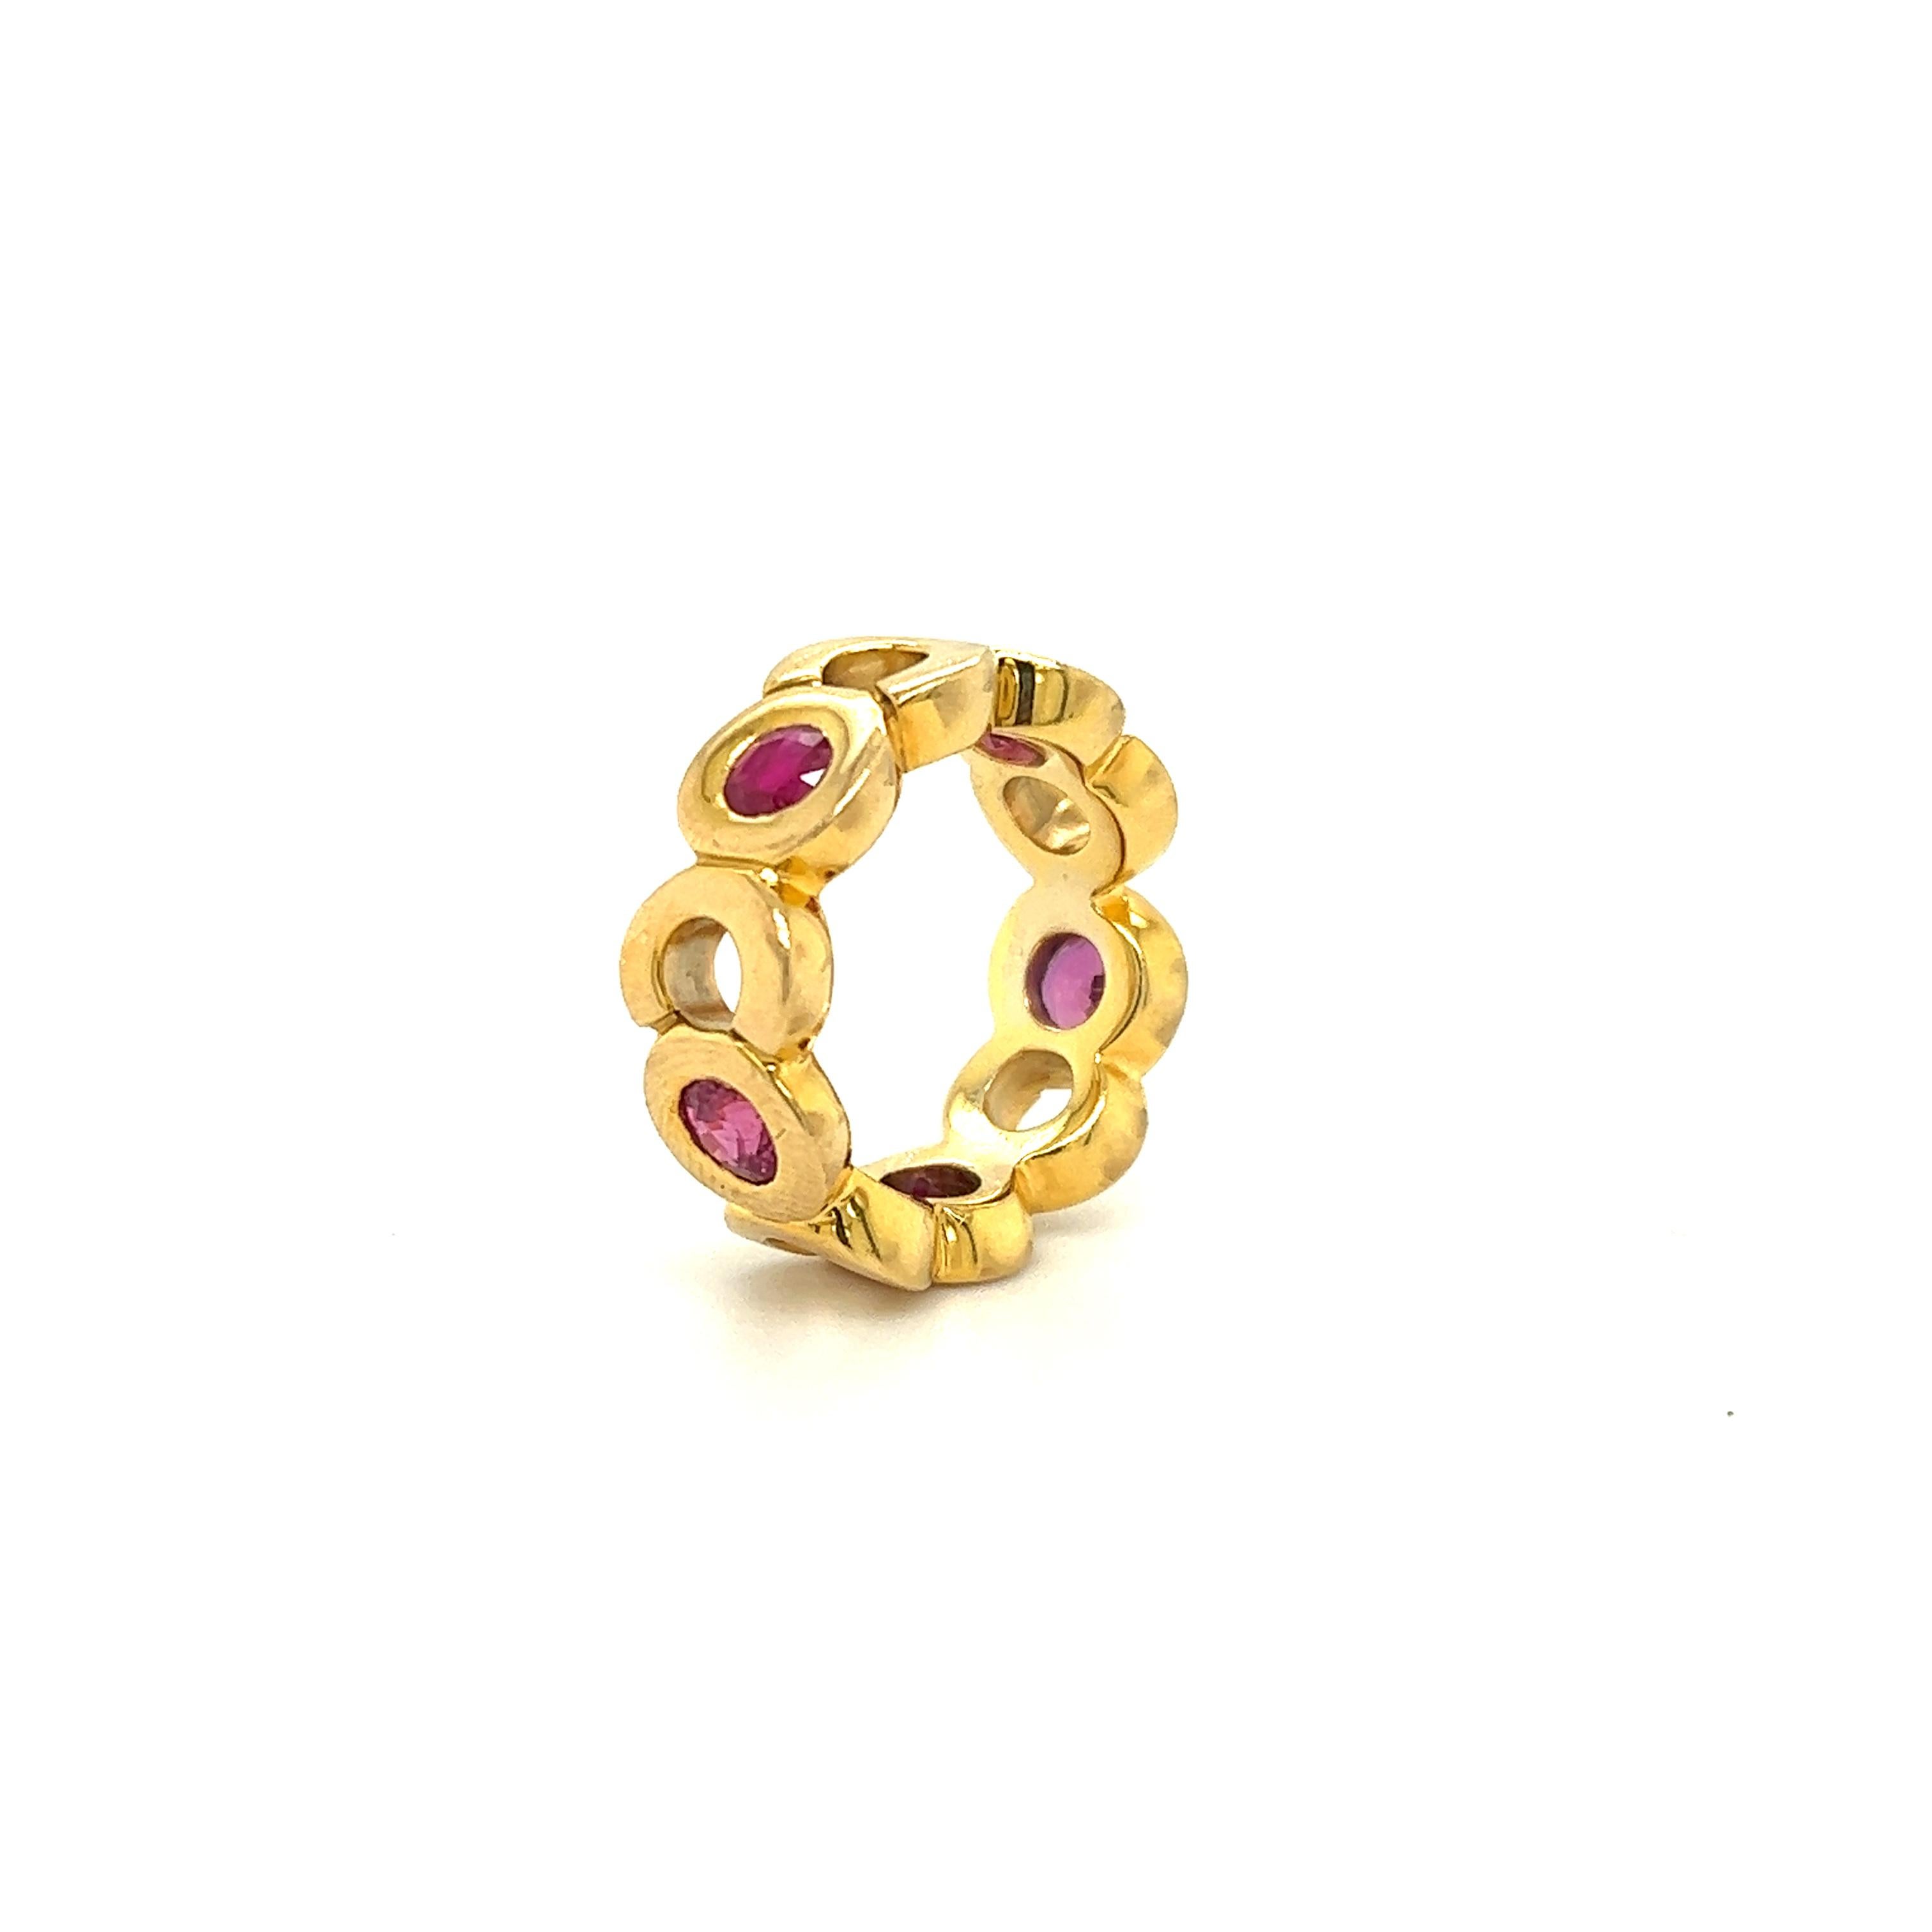 Beautiful ring crafted by famed fashion house Chanel. This elegant ring is crafted in 18k yellow gold and depicts the designers nick name 